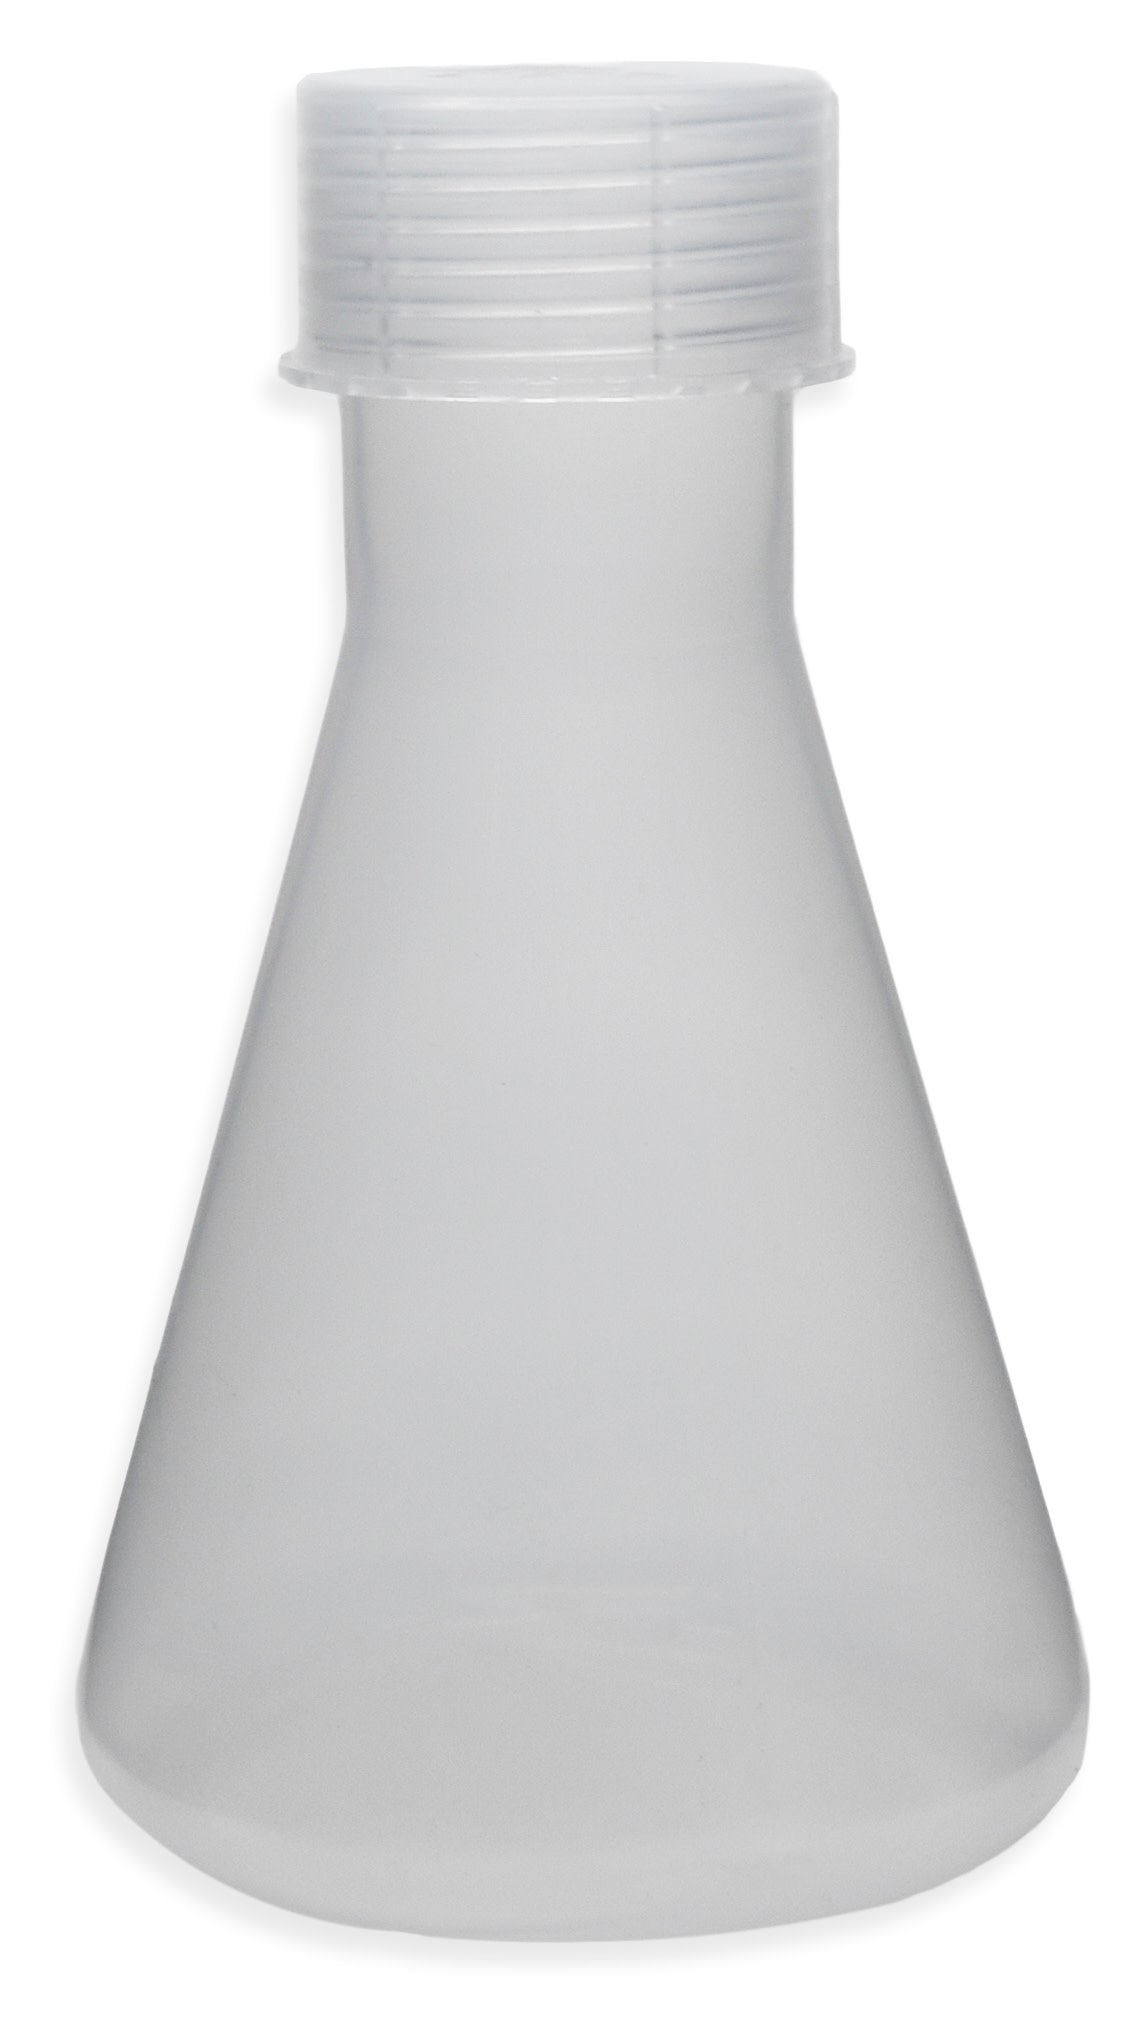 Polypropylene Conical Flask with Screw Cap, 500ml, Non-Graduated, Autoclavable